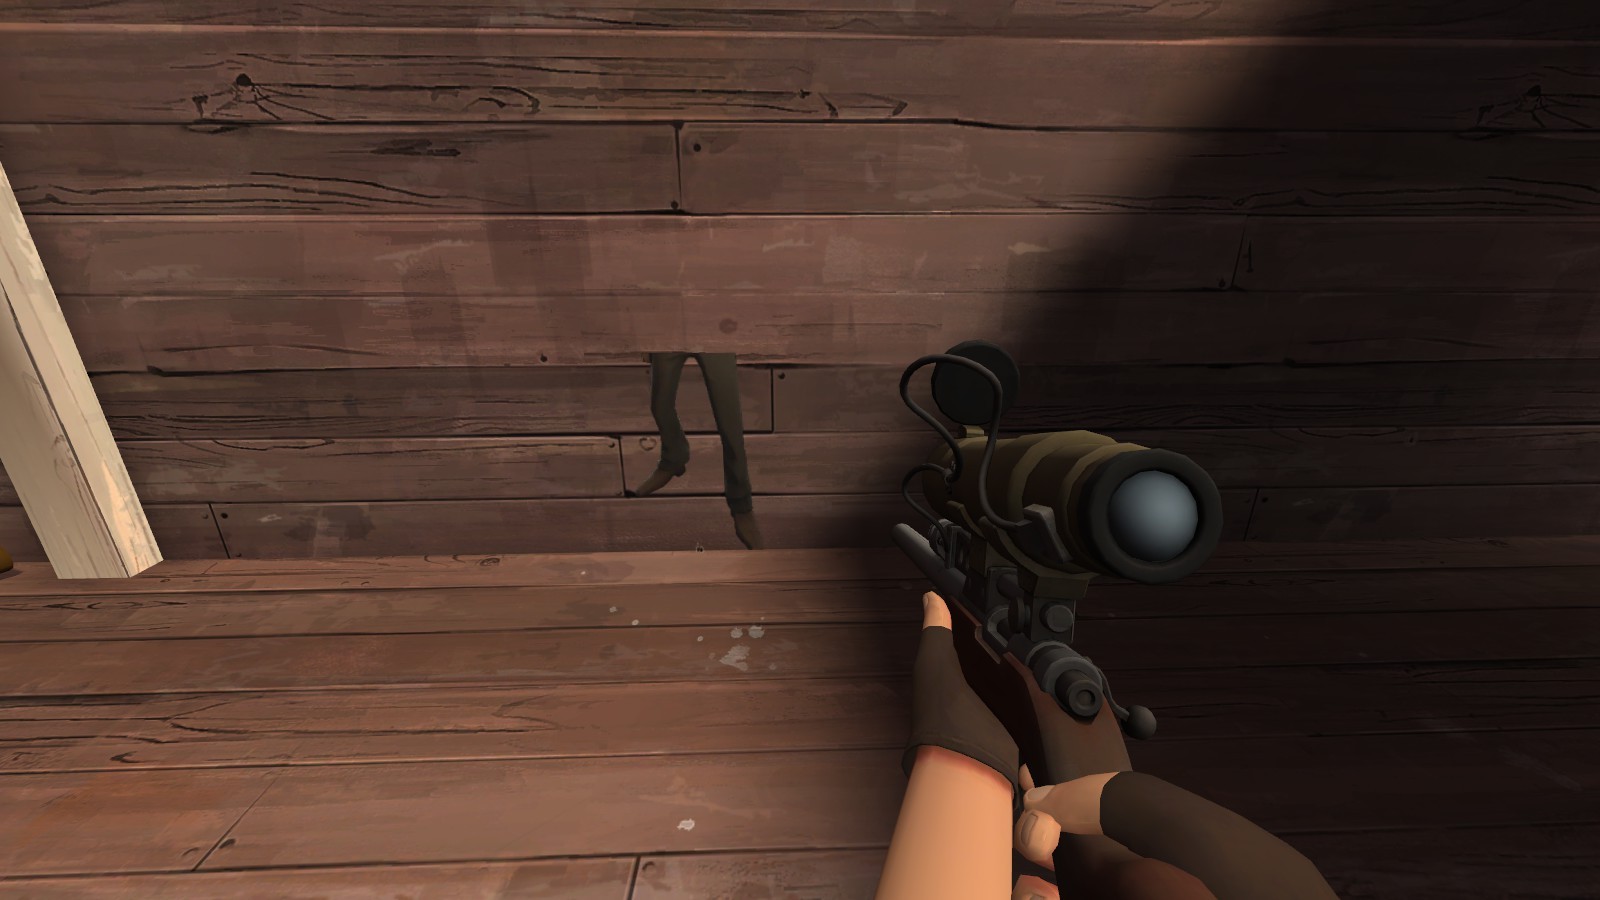 A Spray for Team Fortress 2. Sniper Griefing Spray. 